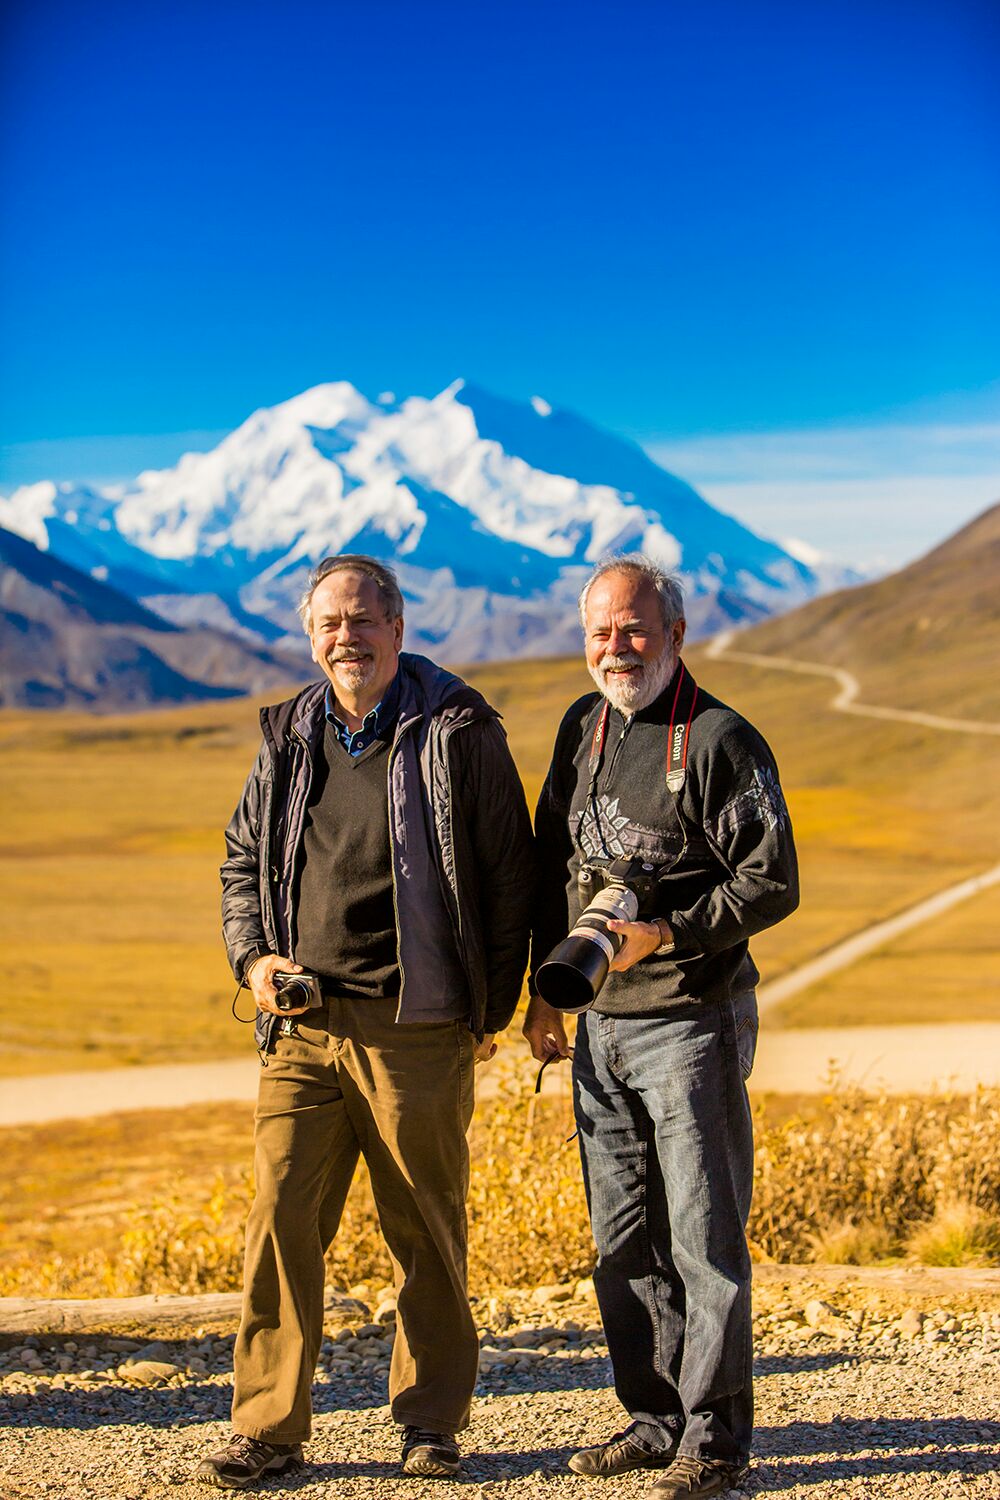 Denis and Louis-Simon in Mount Denali National Park in Alaska (photo by photographer Laura Grier of <a href="http://www.lauragrier.com/">LauraGrierTravel</a>)